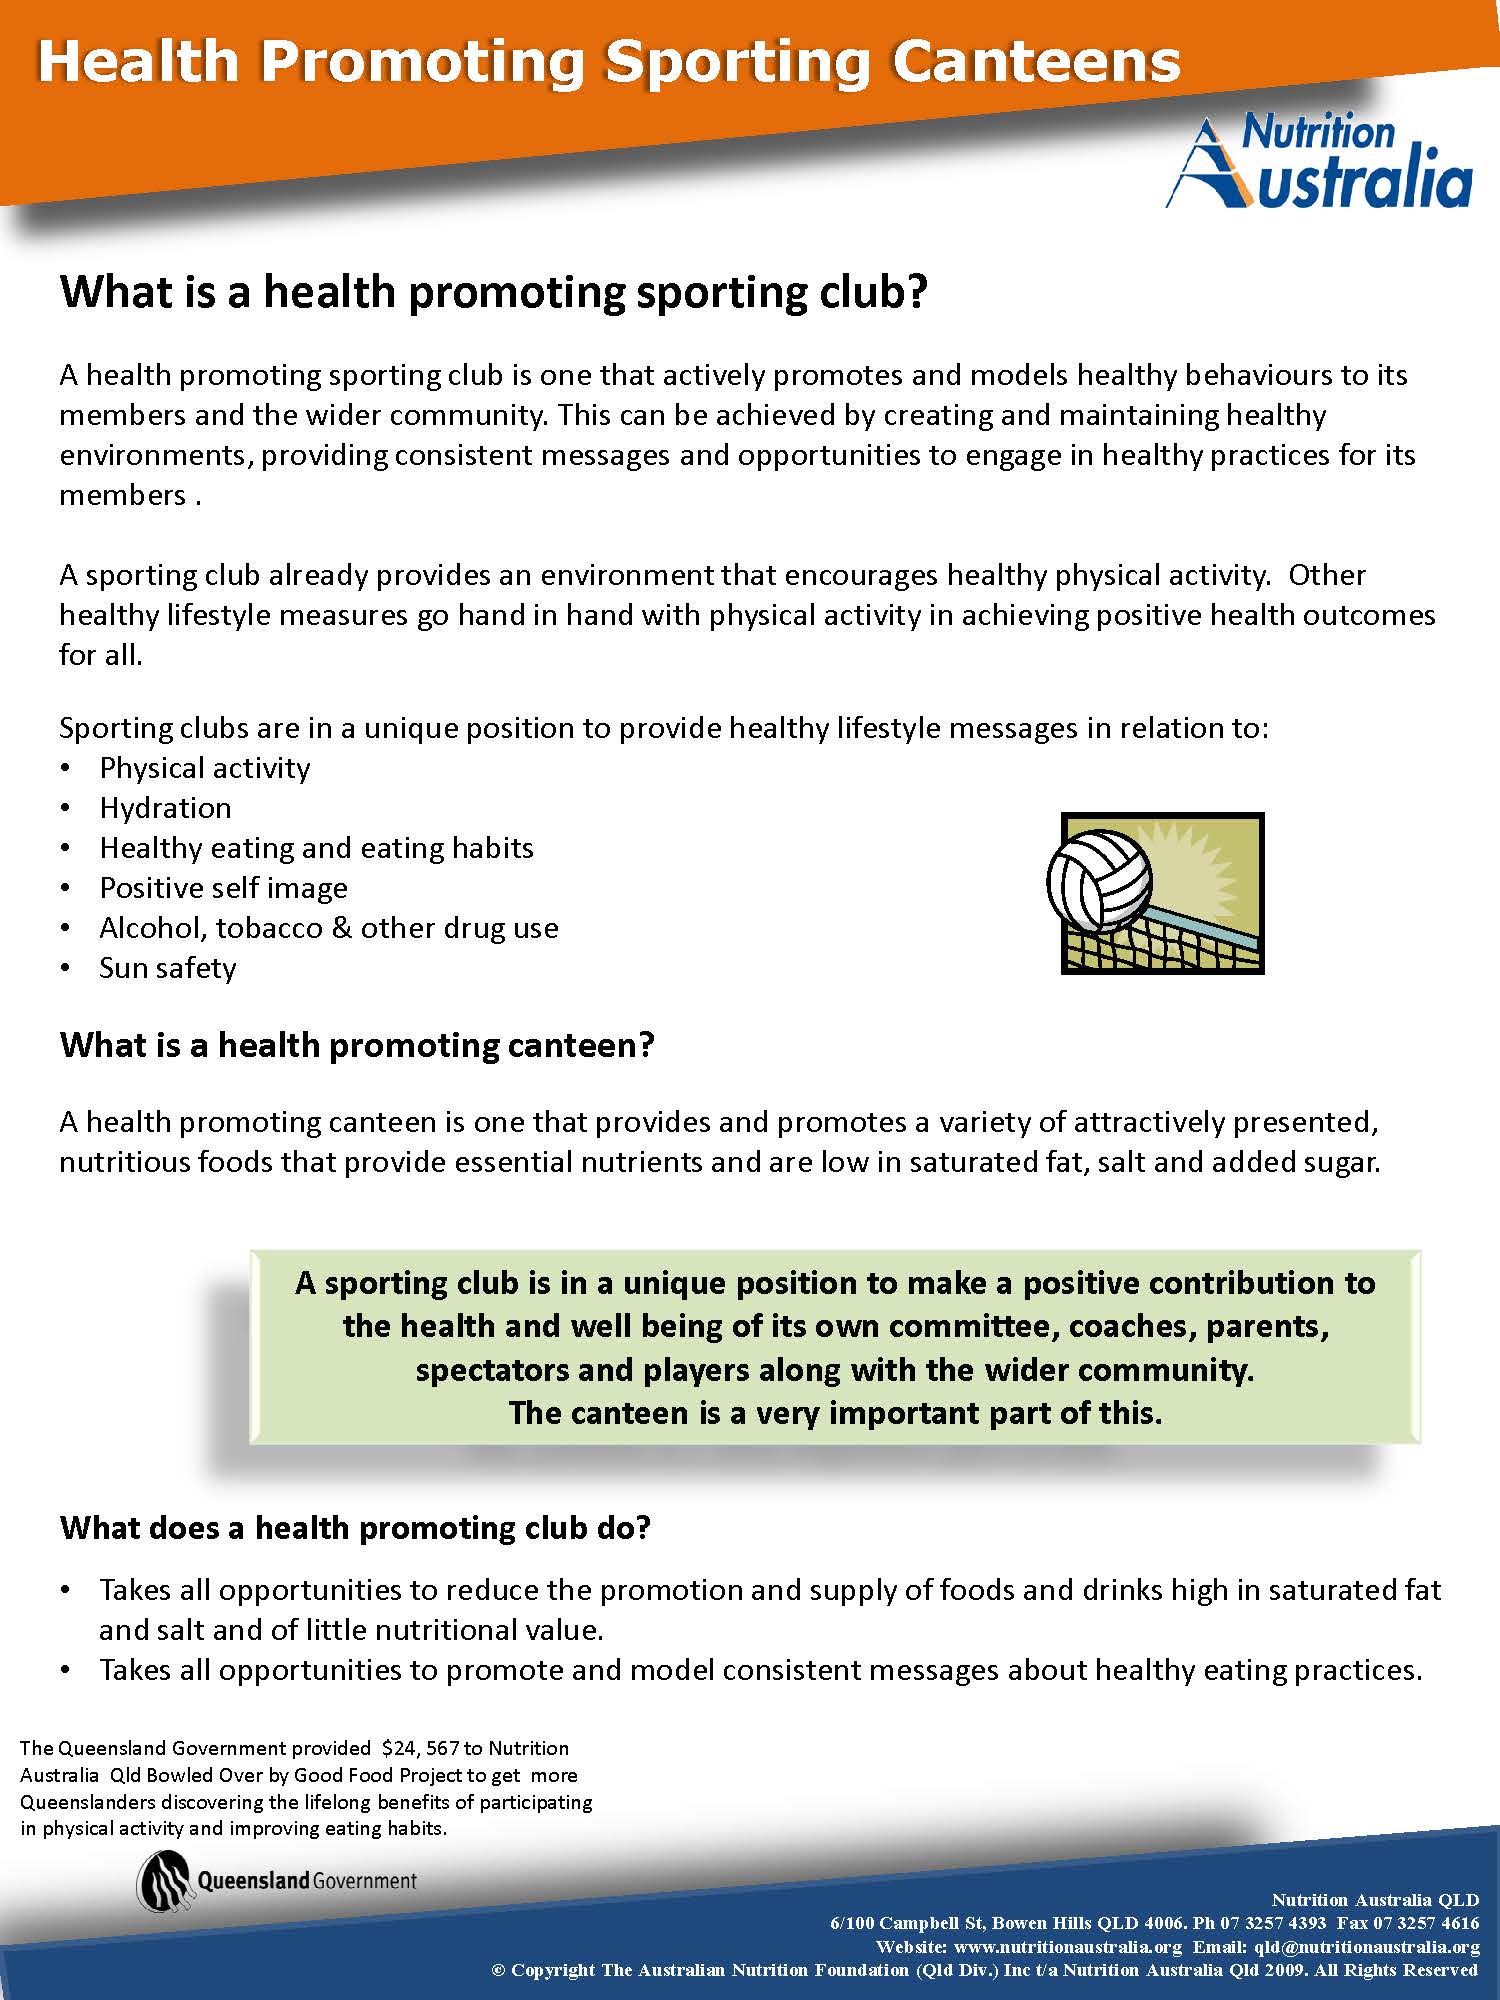 What is a Health Promoting Sporting Club doc